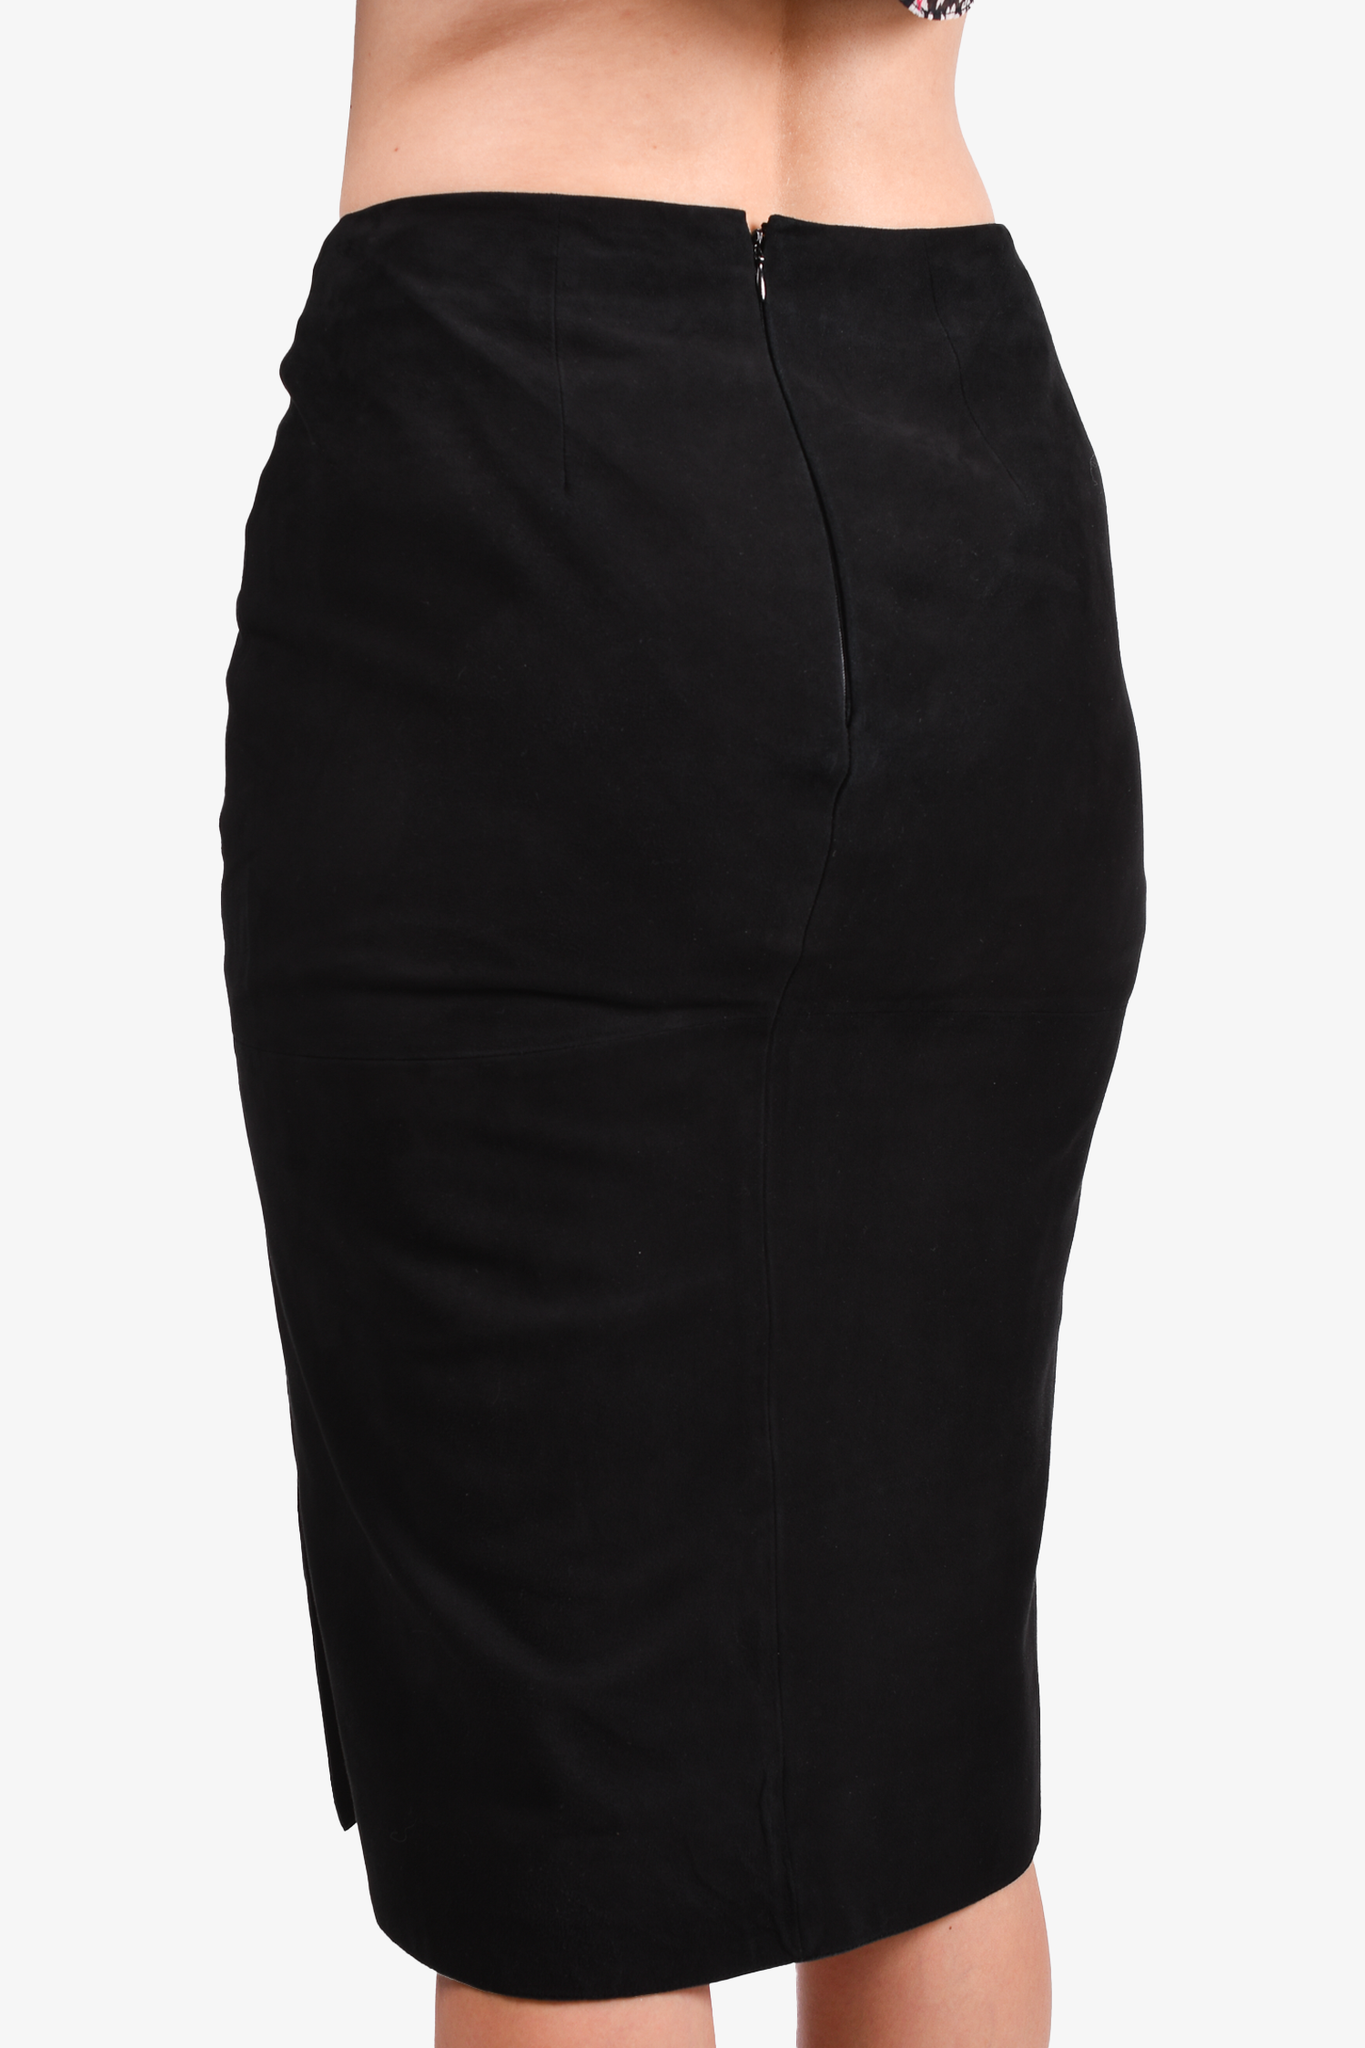 Tom Ford Black Suede Pencil Skirt with Front Slits Size 6